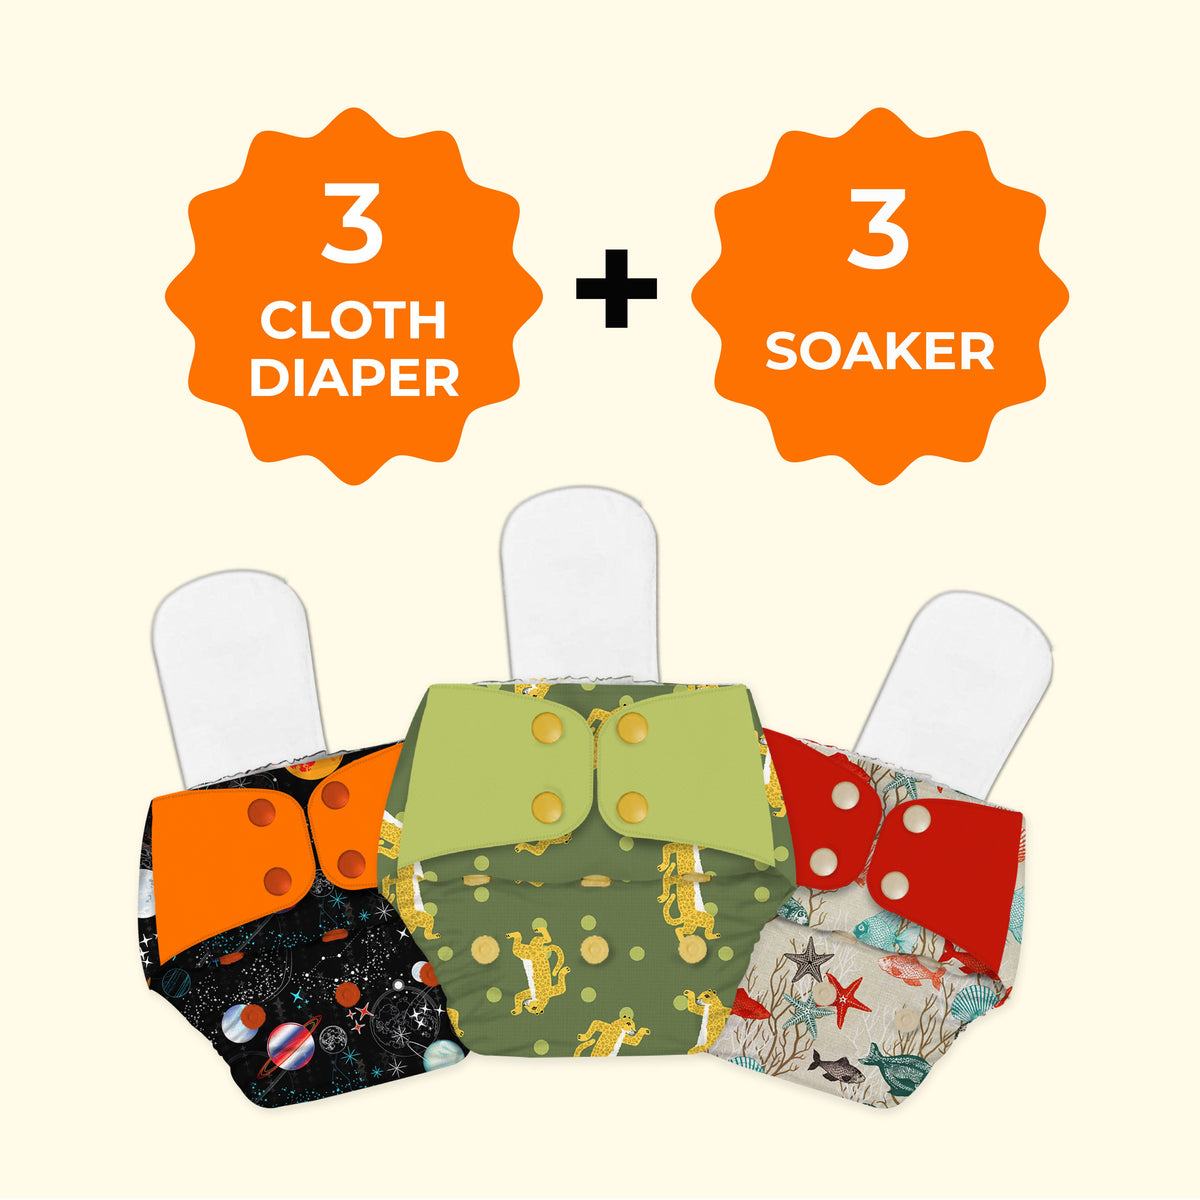 Regular Diaper by Snugkins - Freesize Reusable, Waterproof & Washable Cloth Diapers for day time use. Contains 3 Pocket Diaper & 3 Wet-Free Microfiber Terry Soaker (Fits babies 5-17kgs)